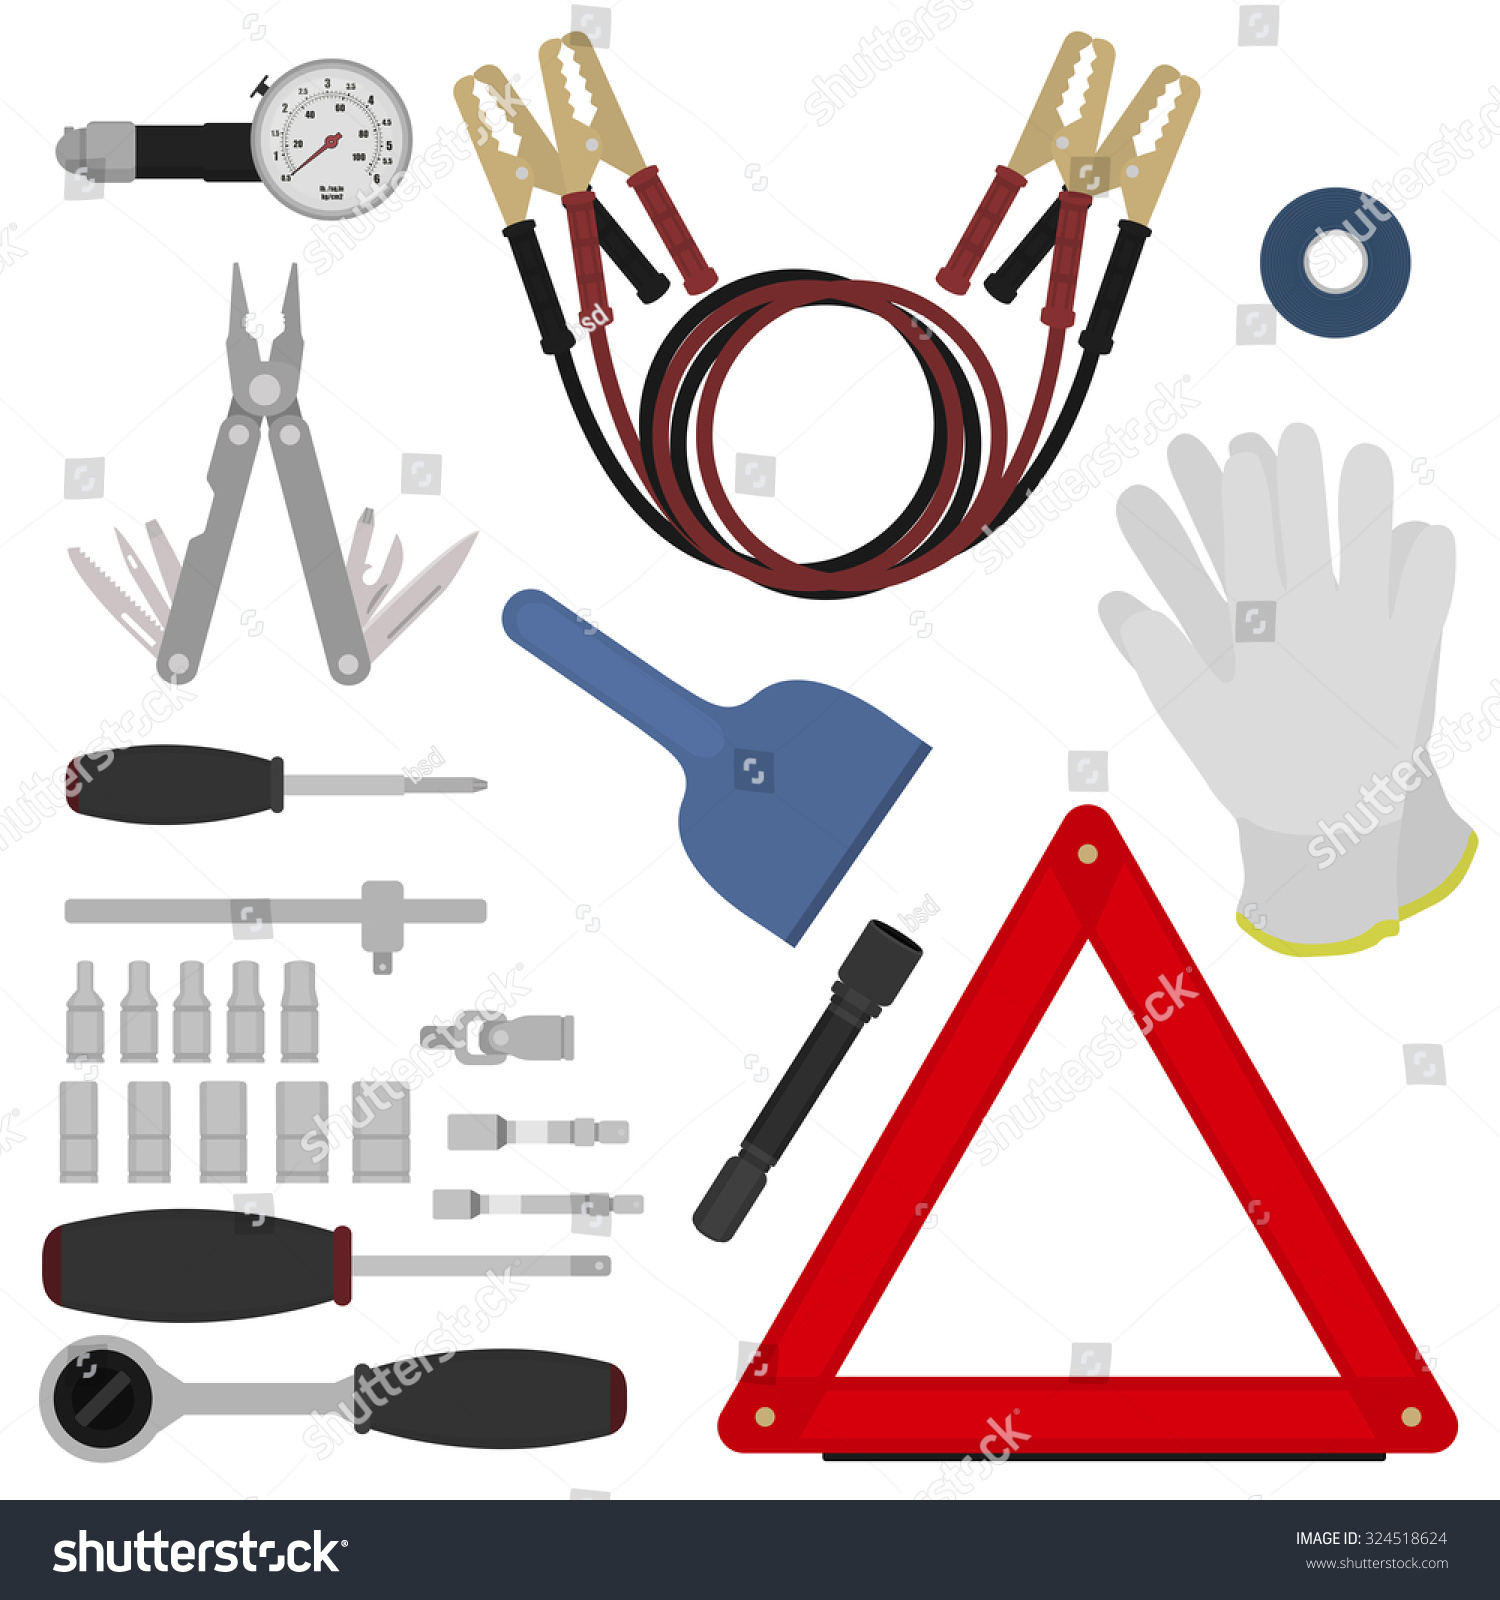 SVG of Emergency road kit items set. Car service and repairing equipment. Auto mechanic tools. Ice scraper and jumper cables. Triangle warning sign and flashlight. Vector isolated illustrations. Color svg